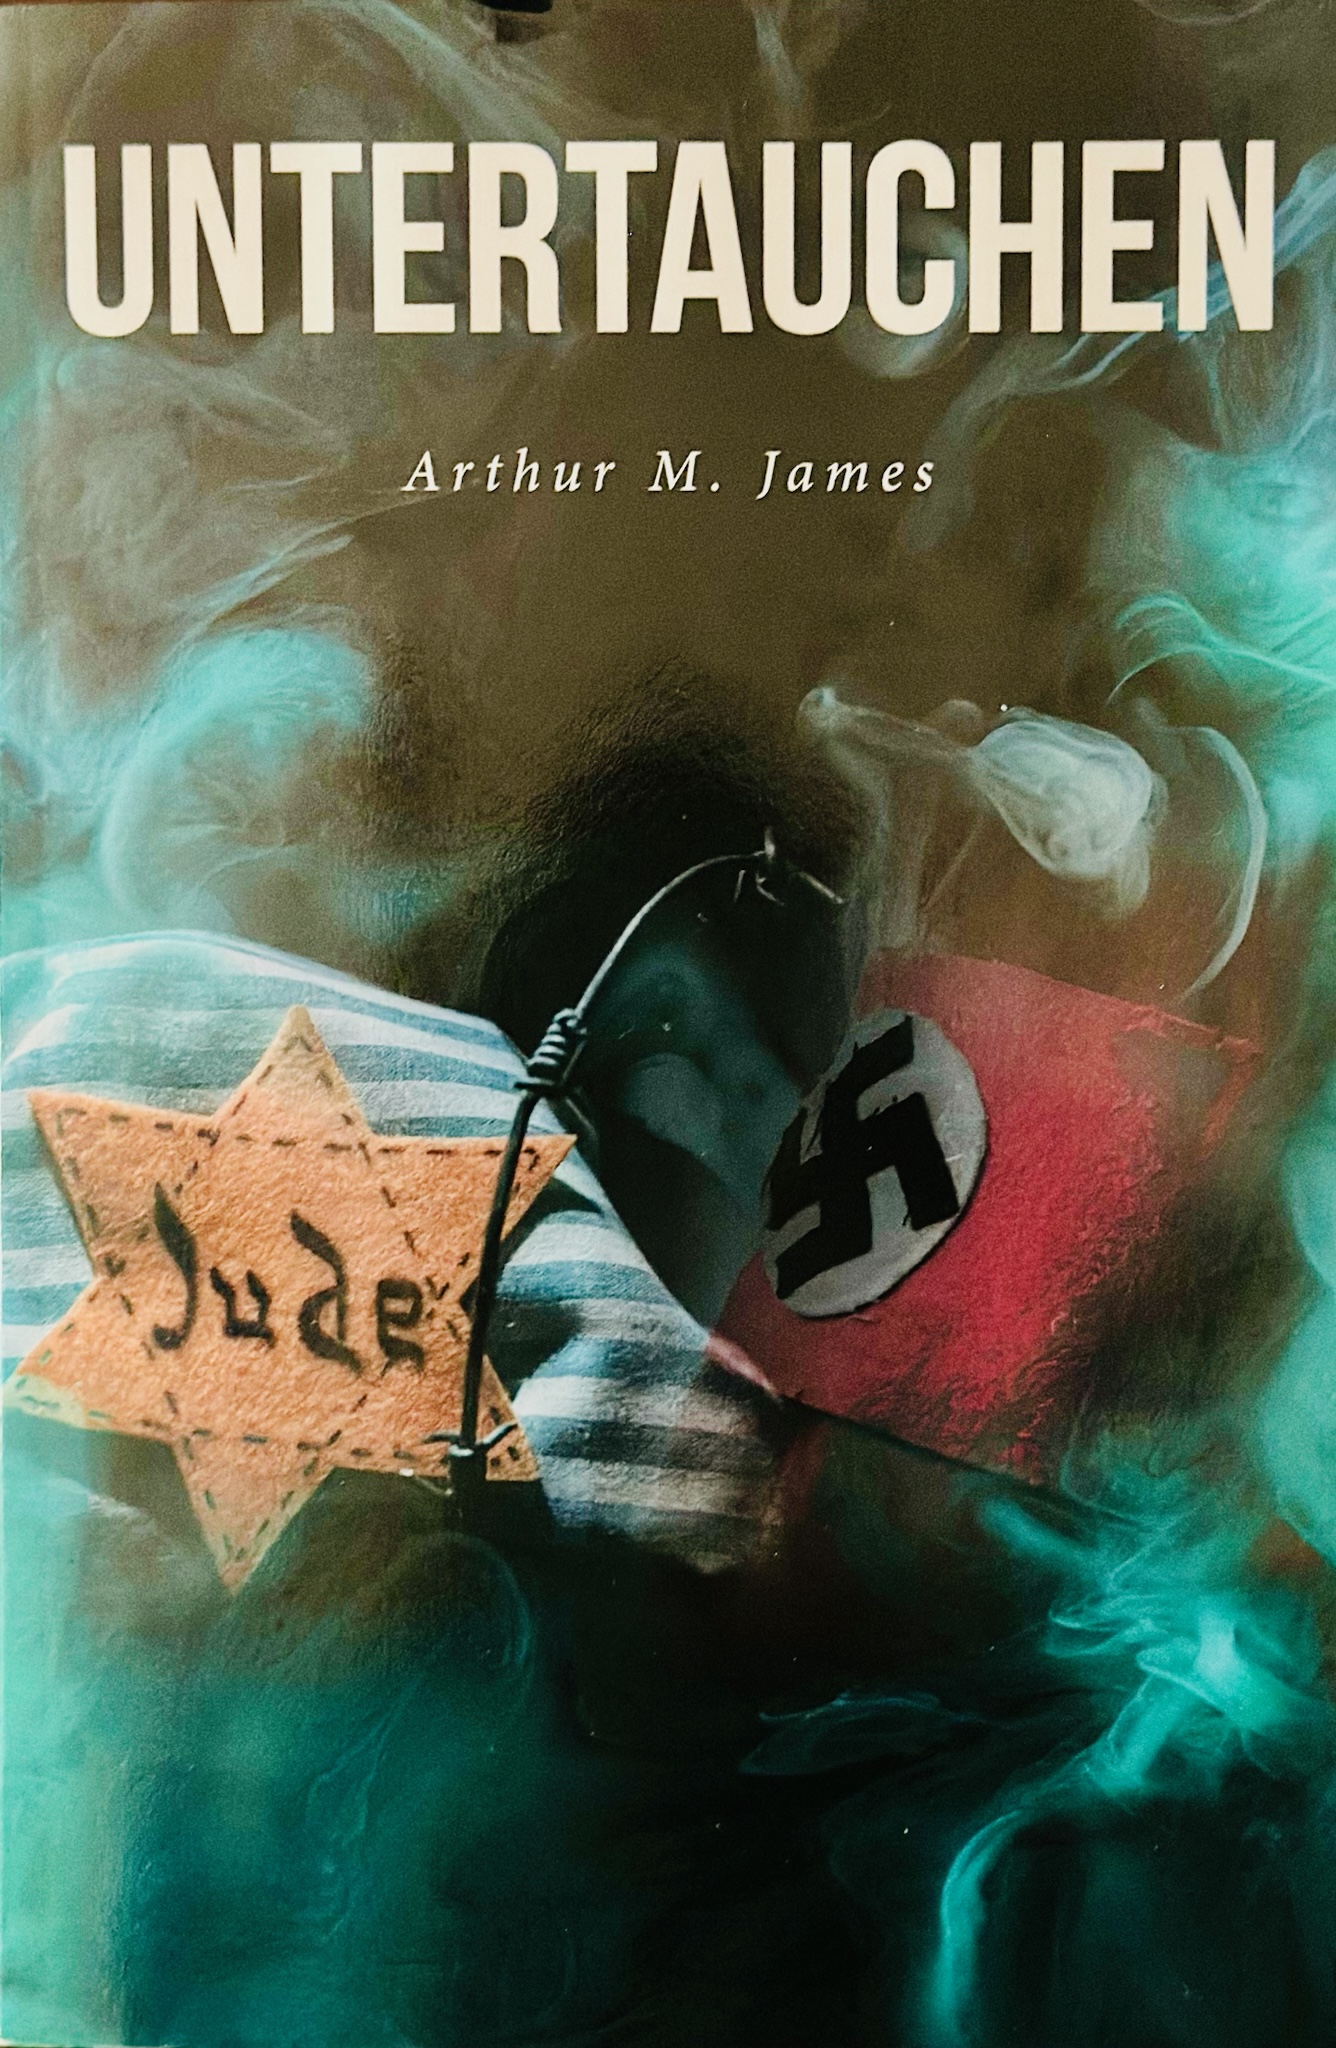 Arthur M. James’s New Book, "Untertauchen: A Historical Novel," Follows a Jewish Couple Living in Nazi Germany Who Must Go Into Hiding and Eventually Flee Their Home